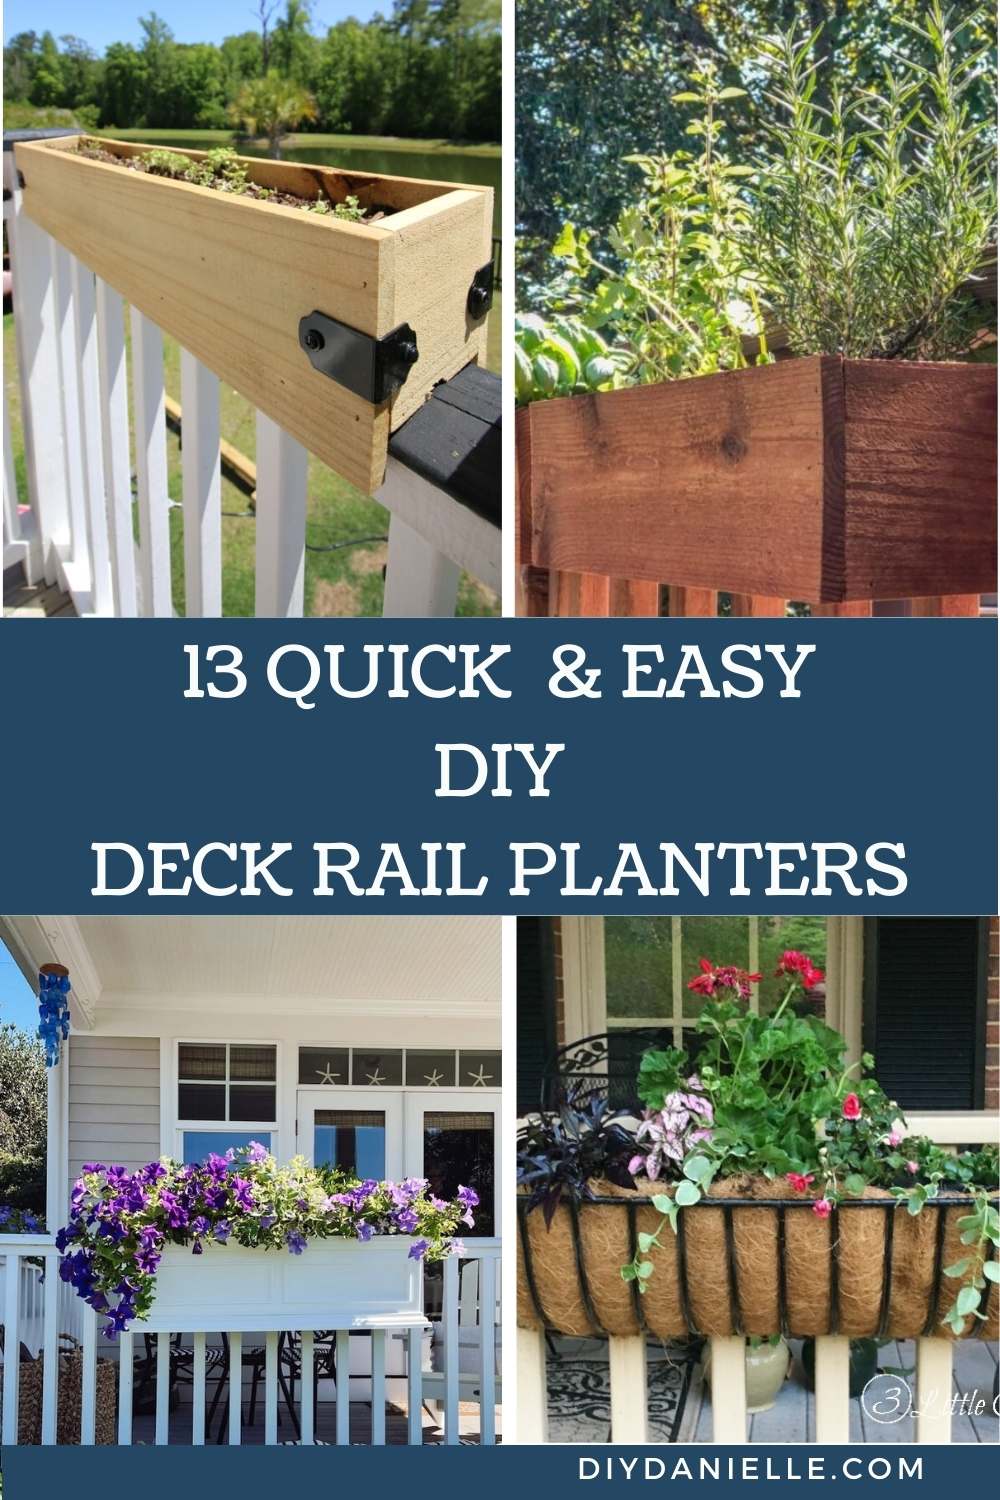 DIY Deck Railing Planters pin collage with text